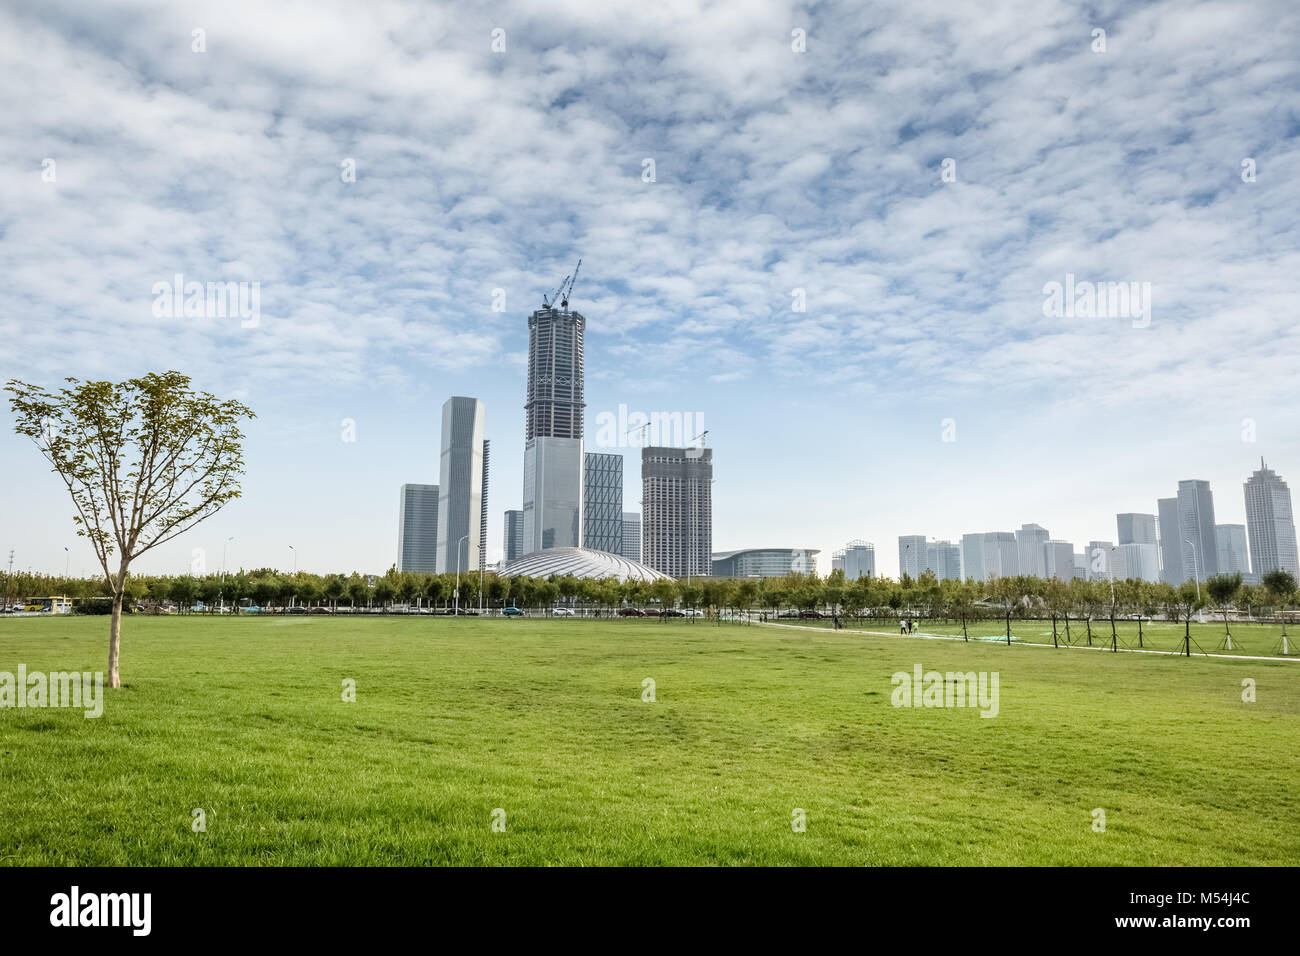 green space park on new city Stock Photo